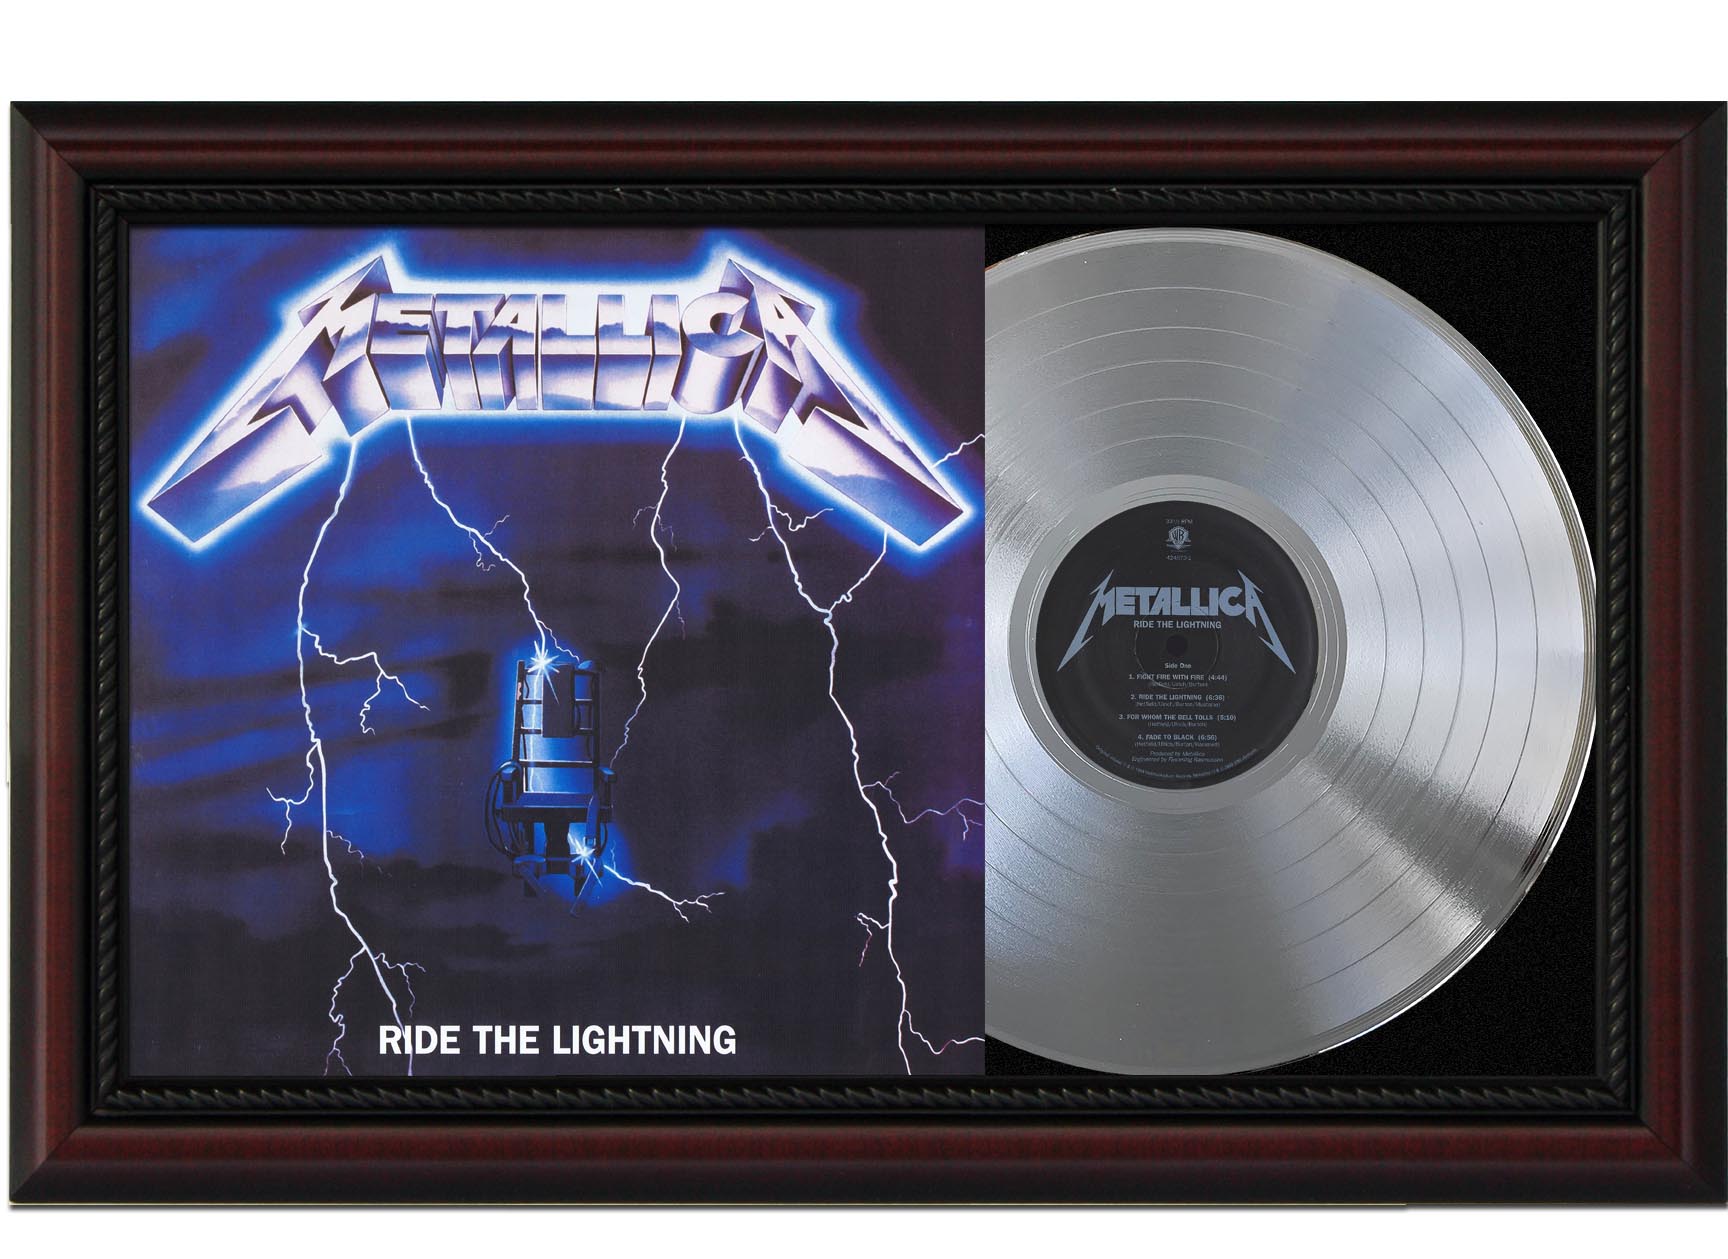 Metallica - One Framed Signature Gold LP Record Display M4 - Gold Record  Outlet Album and Disc Collectible Memorabilia